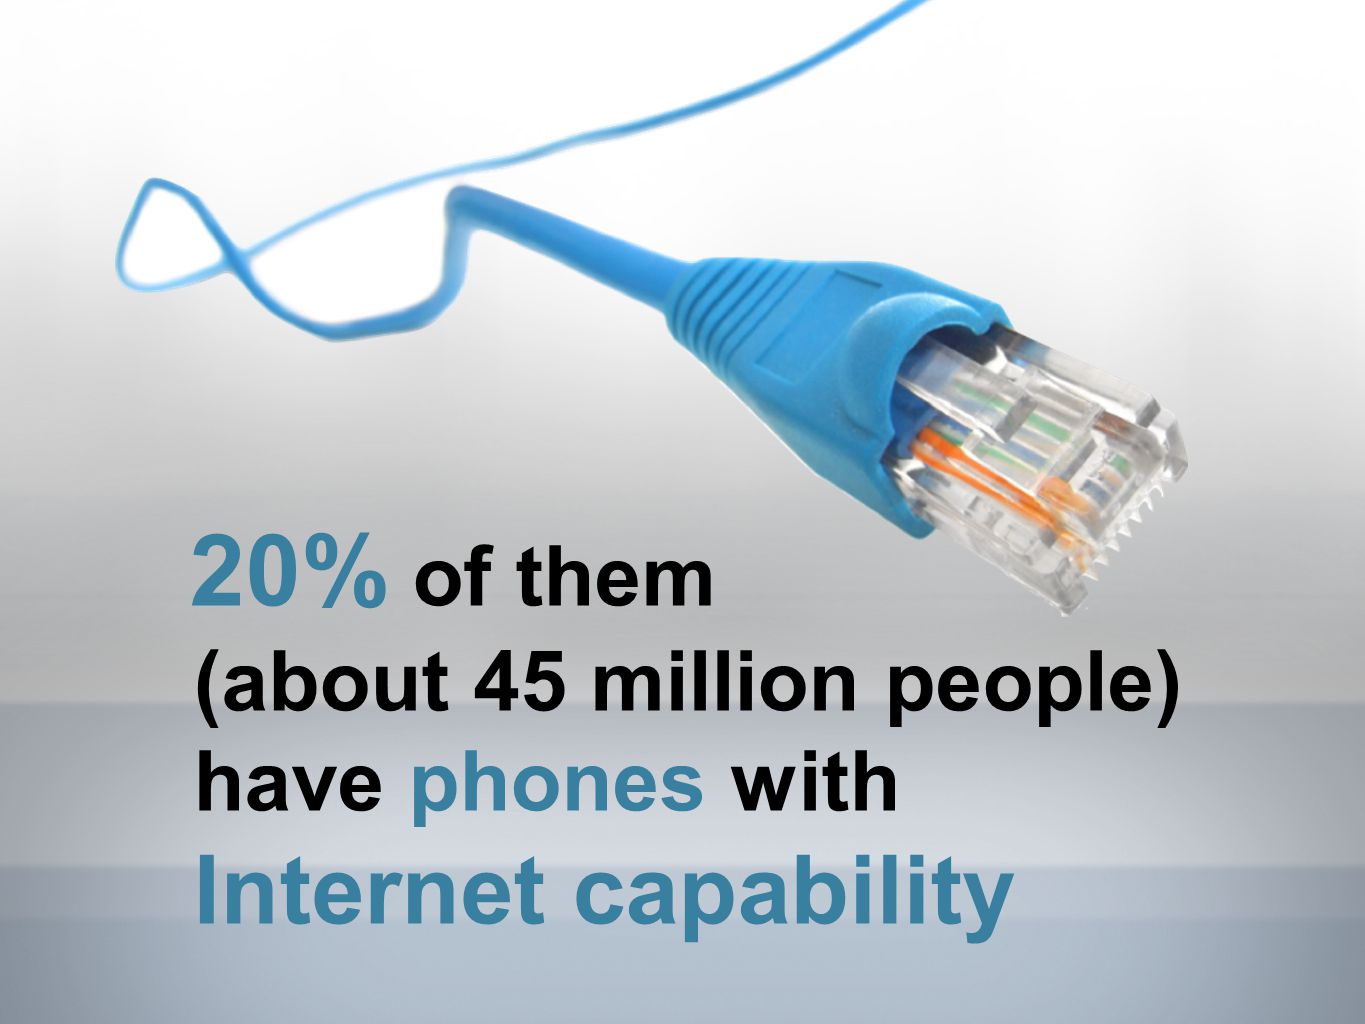 20% of them (about 45 million people) have phones with Internet capability